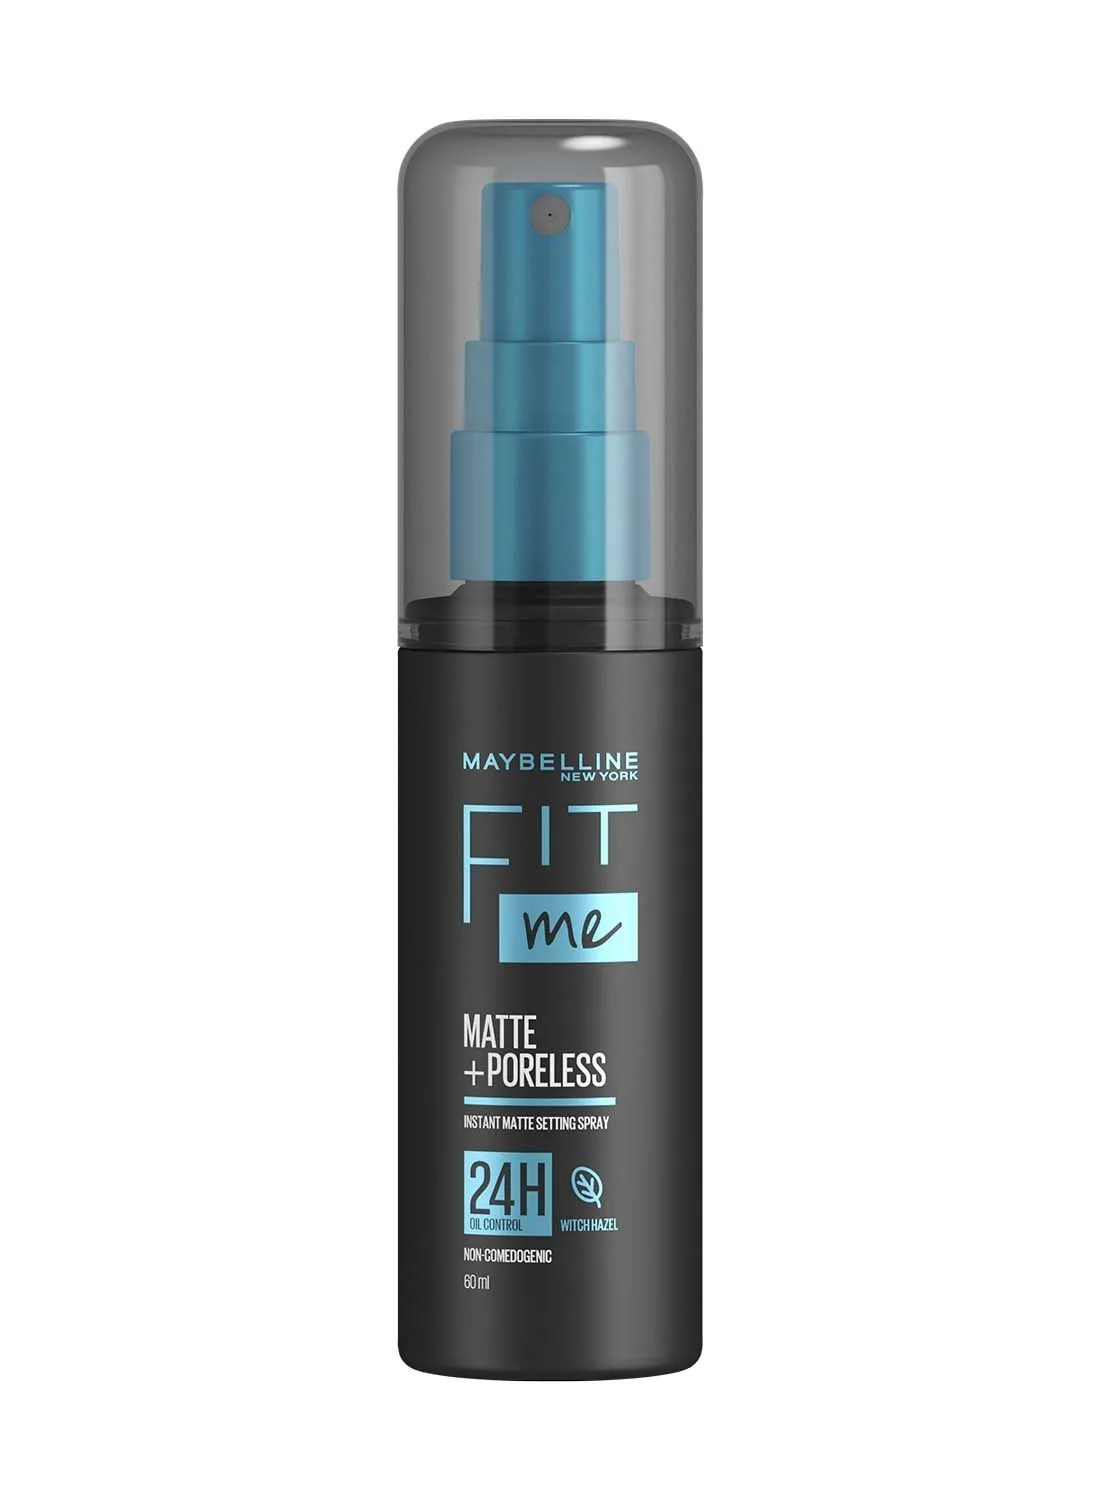 MAYBELLINE NEW YORK Fit Me Setting Spray